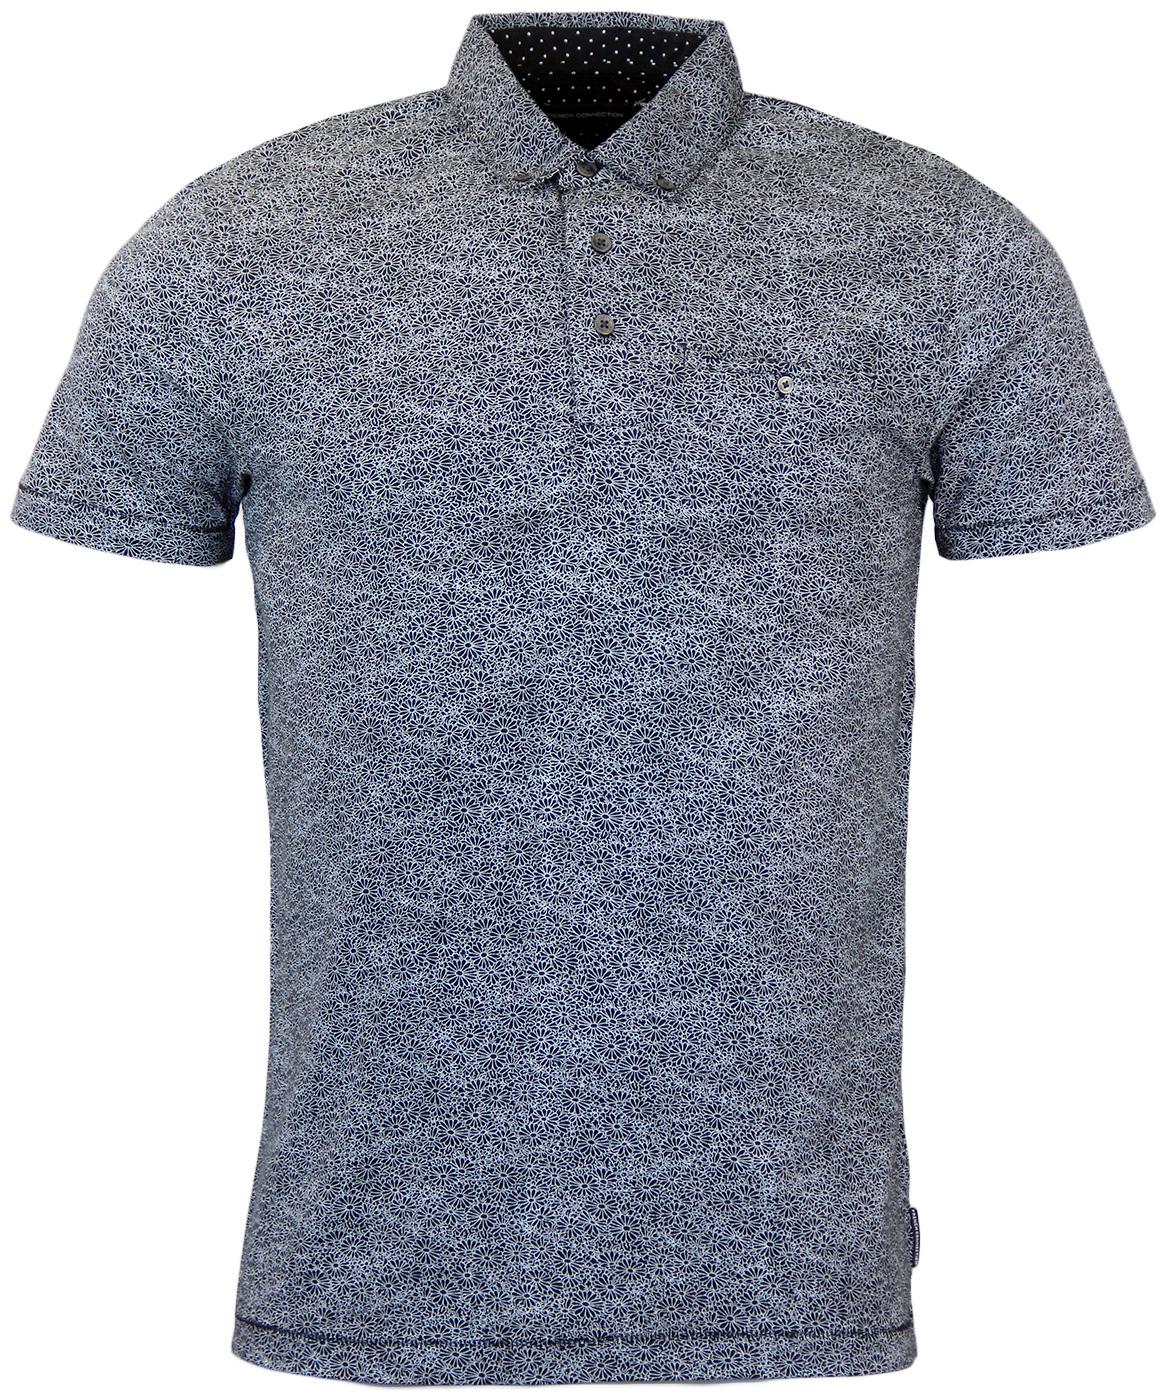 FRENCH CONNECTION Retro 70s Daisy Print Polo in Marine Blue